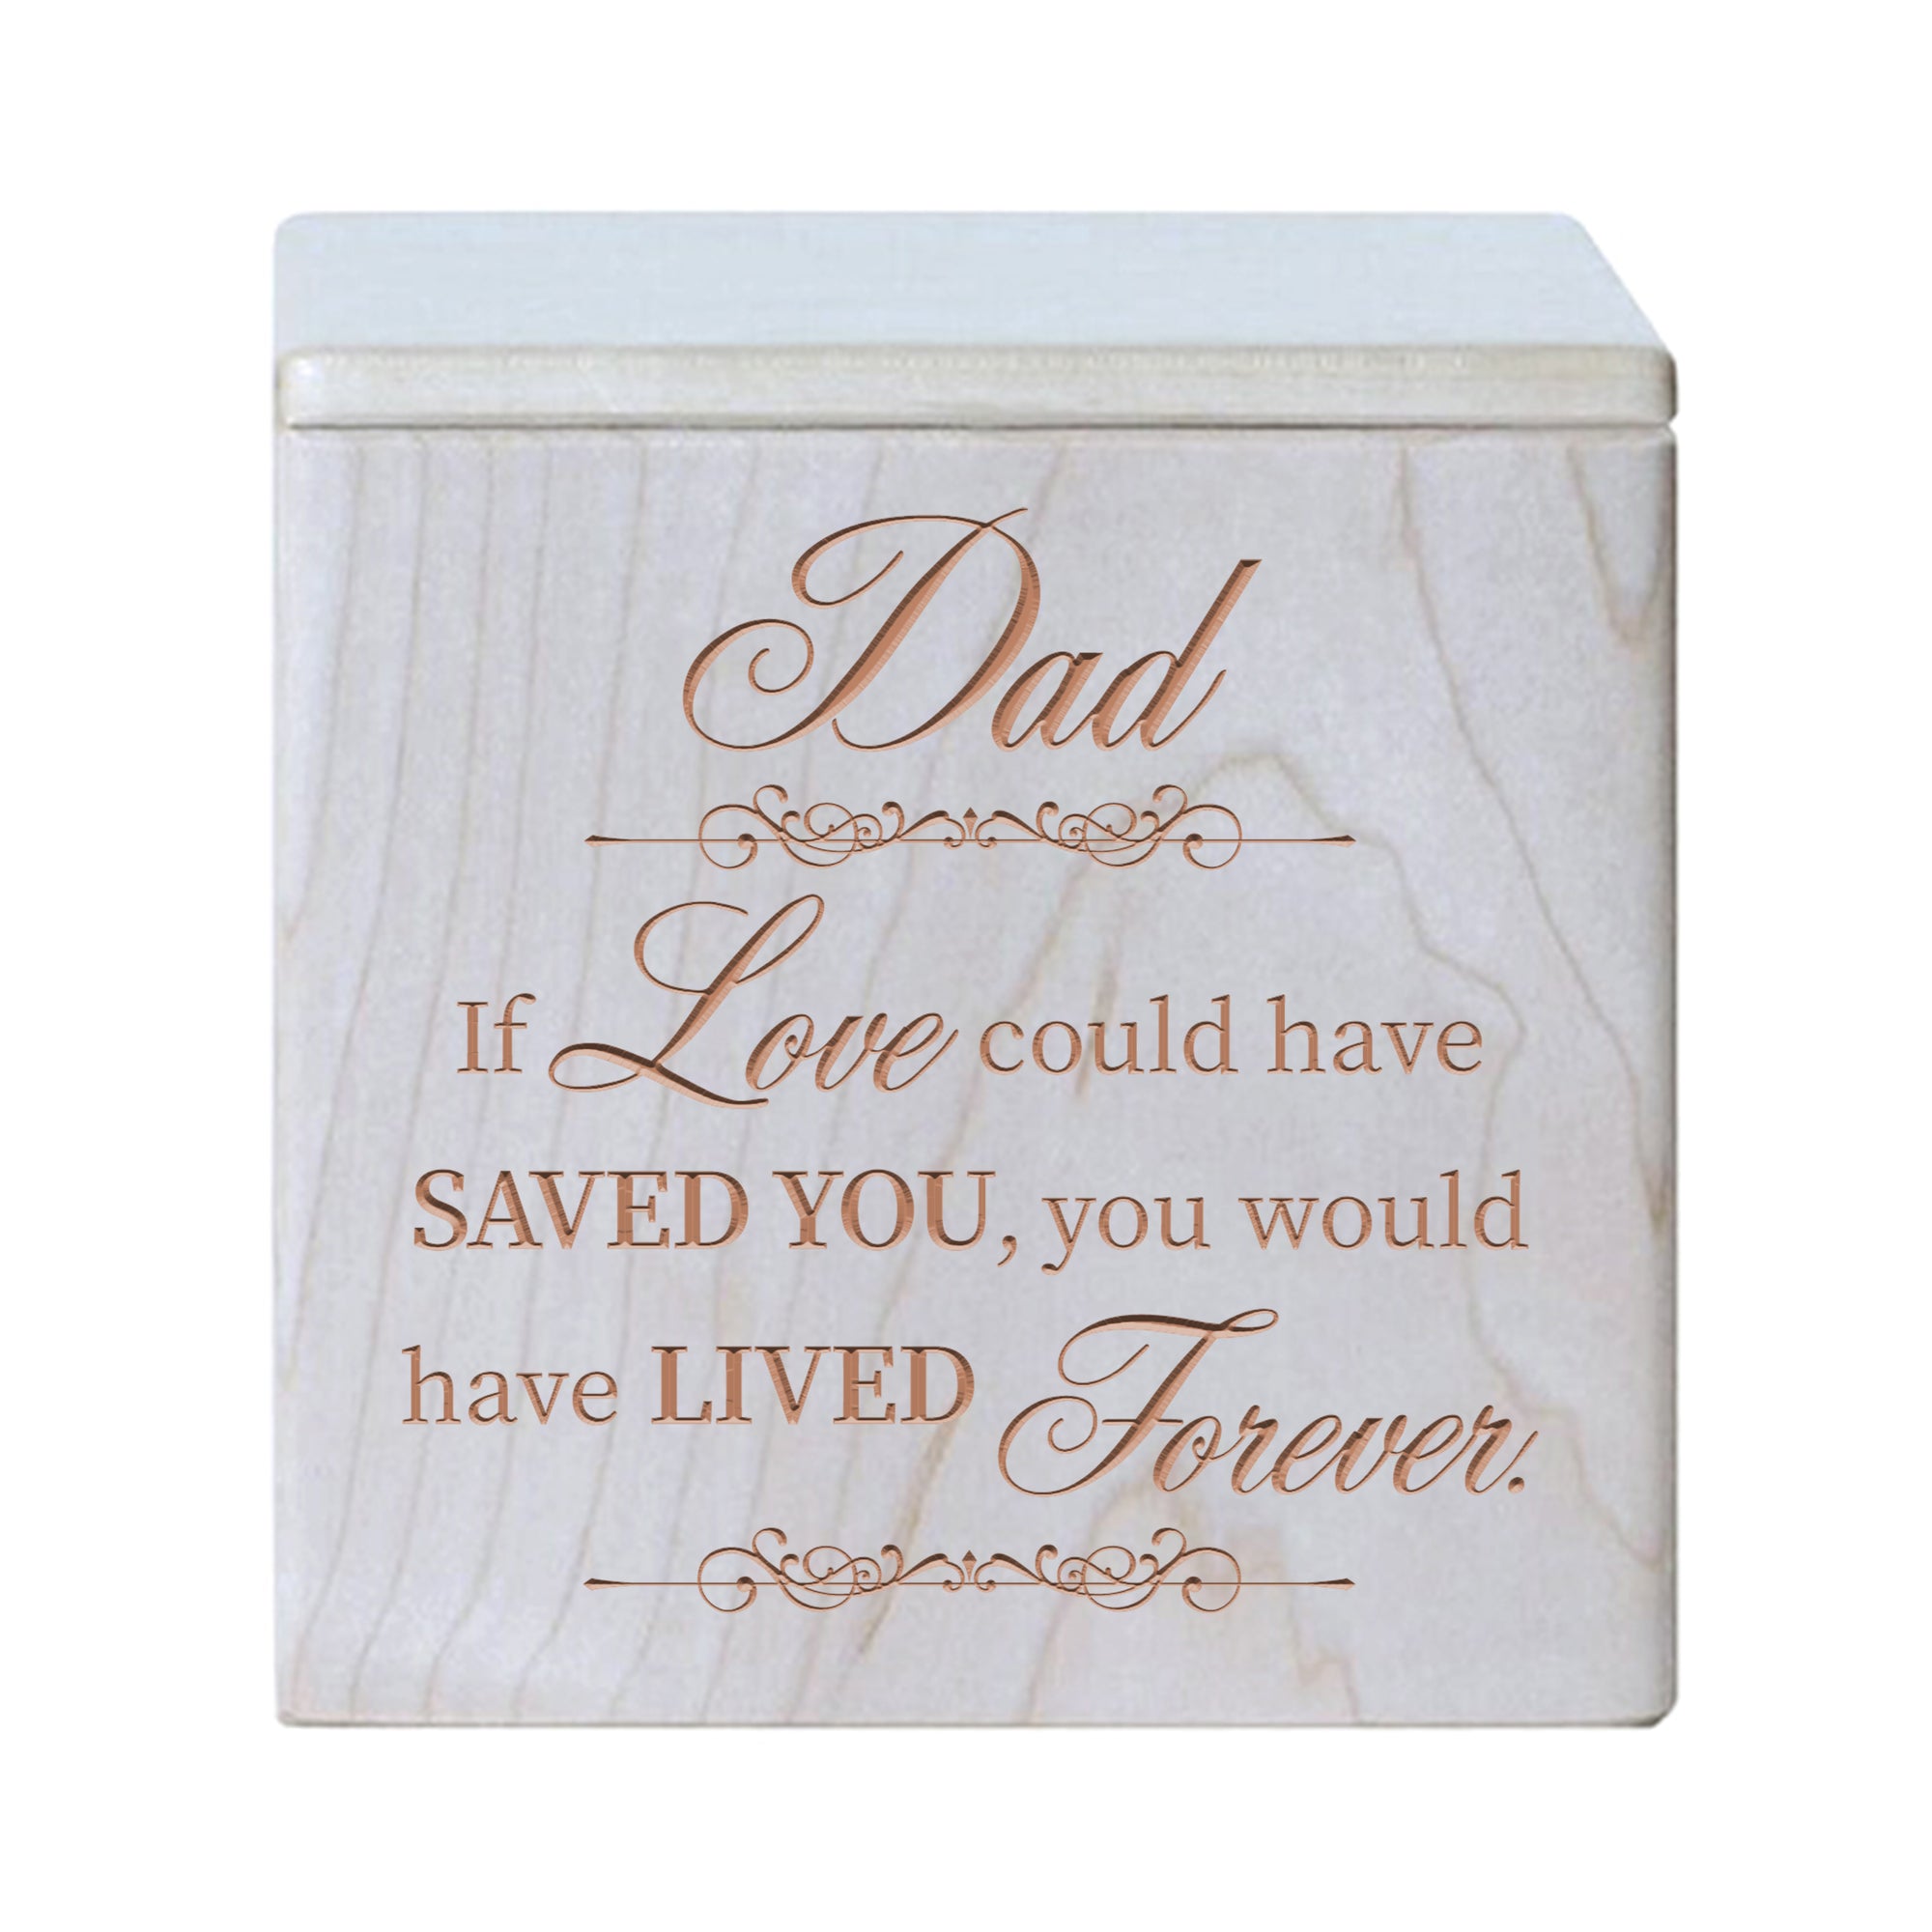 Wooden Memorial Cremation Urn Keepsake Box for Human or Pet Ashes - If Love Could, Dad